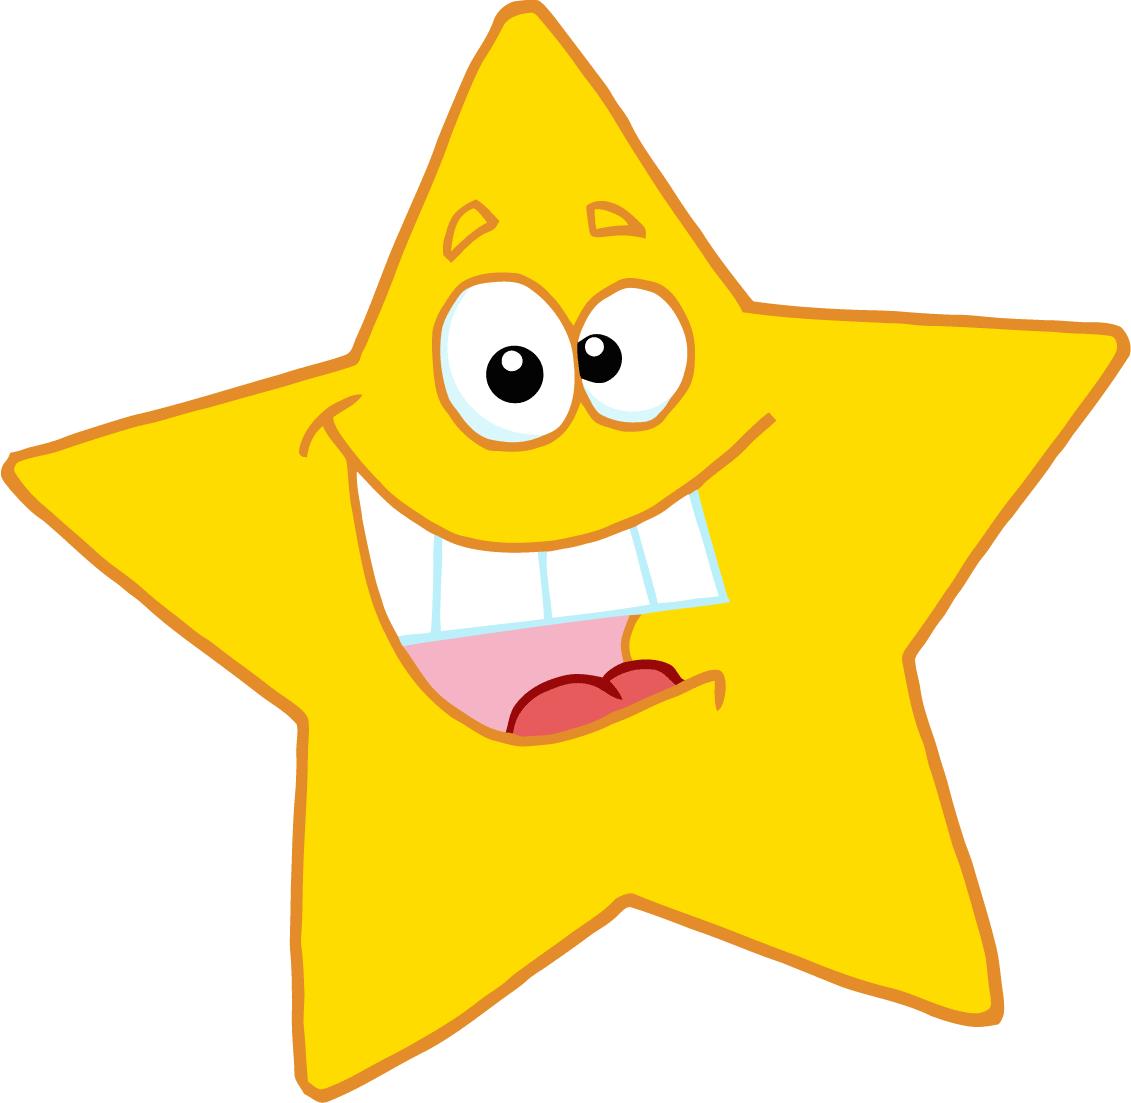 Red star in star clipart vector clip art free Clipartix